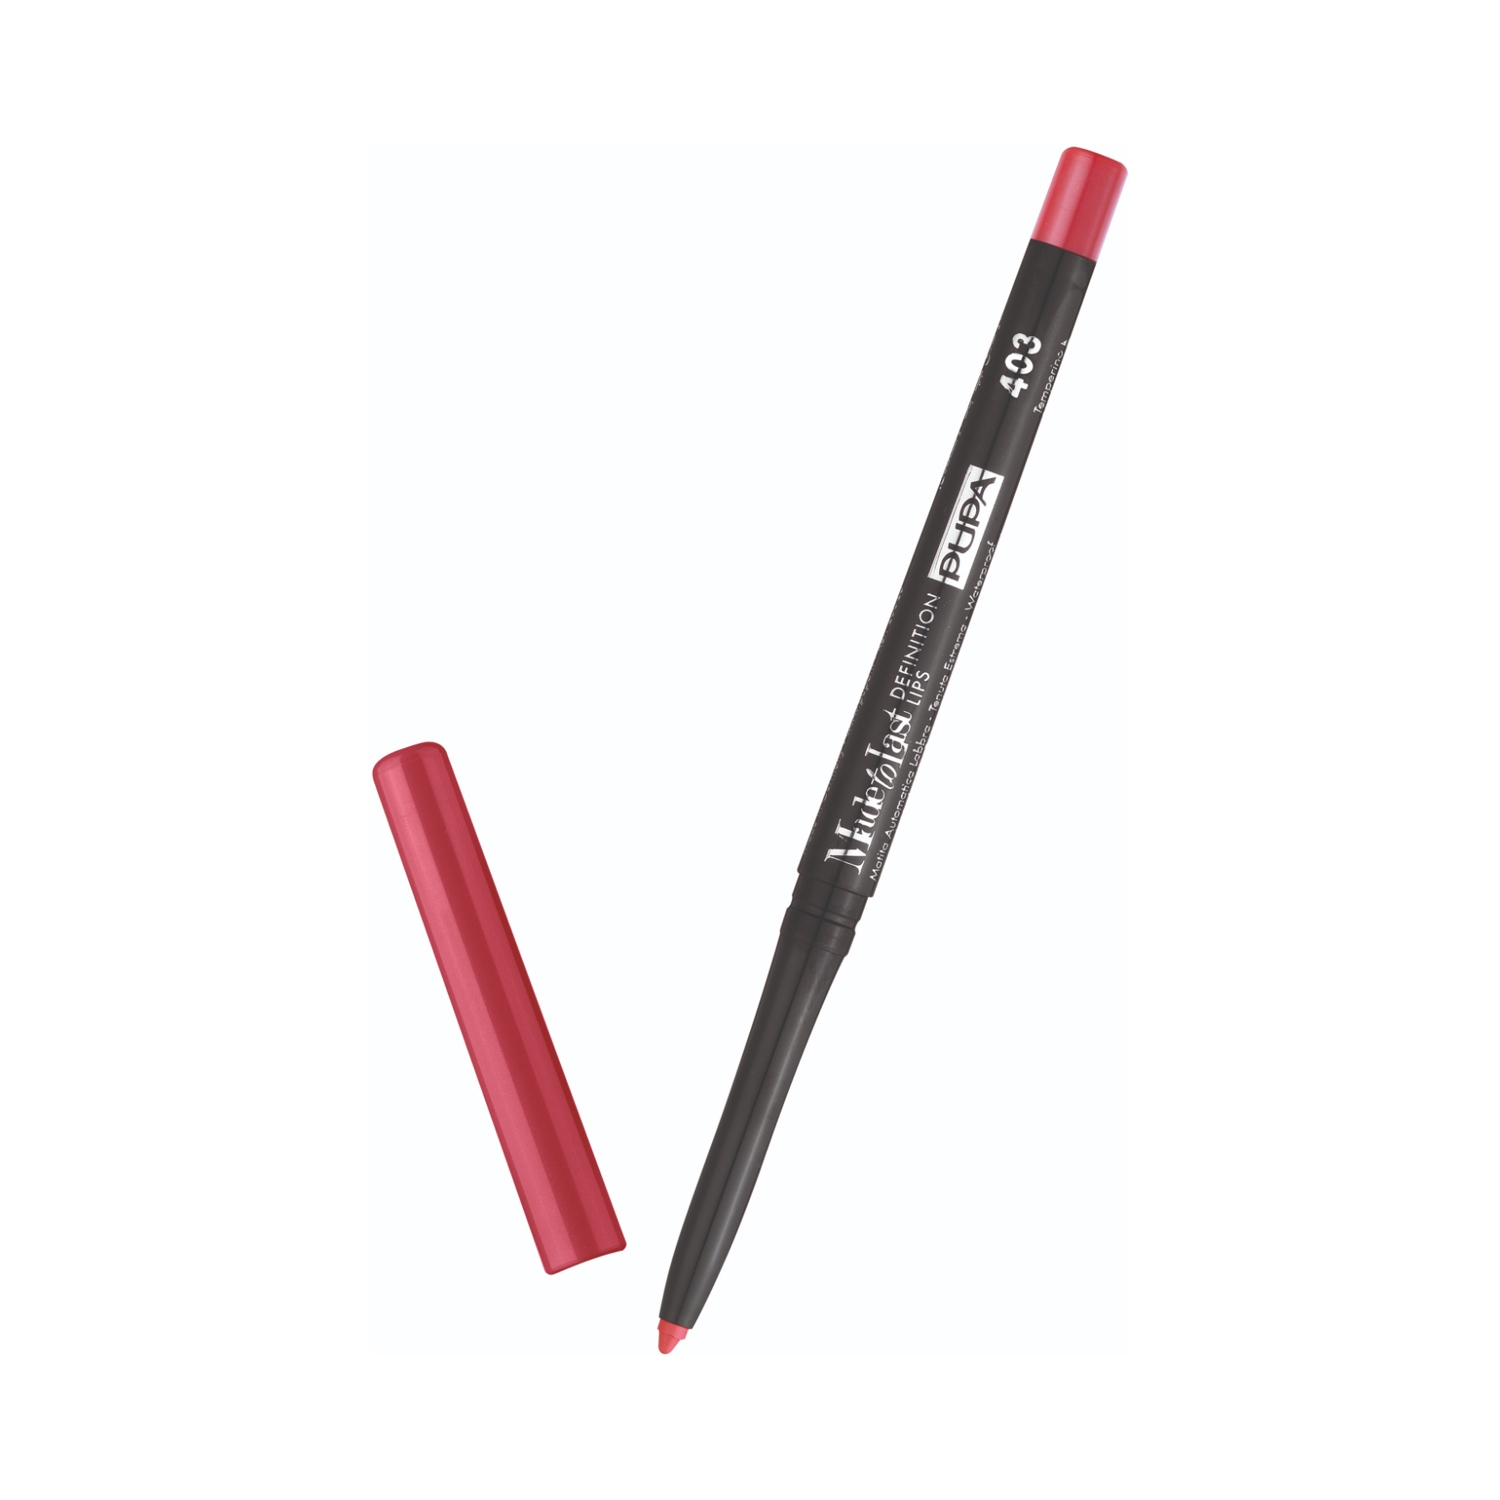 Pupa Milano Made To Last Definition Lip Pencil - 403 Fruit Cocktail (0.35g)